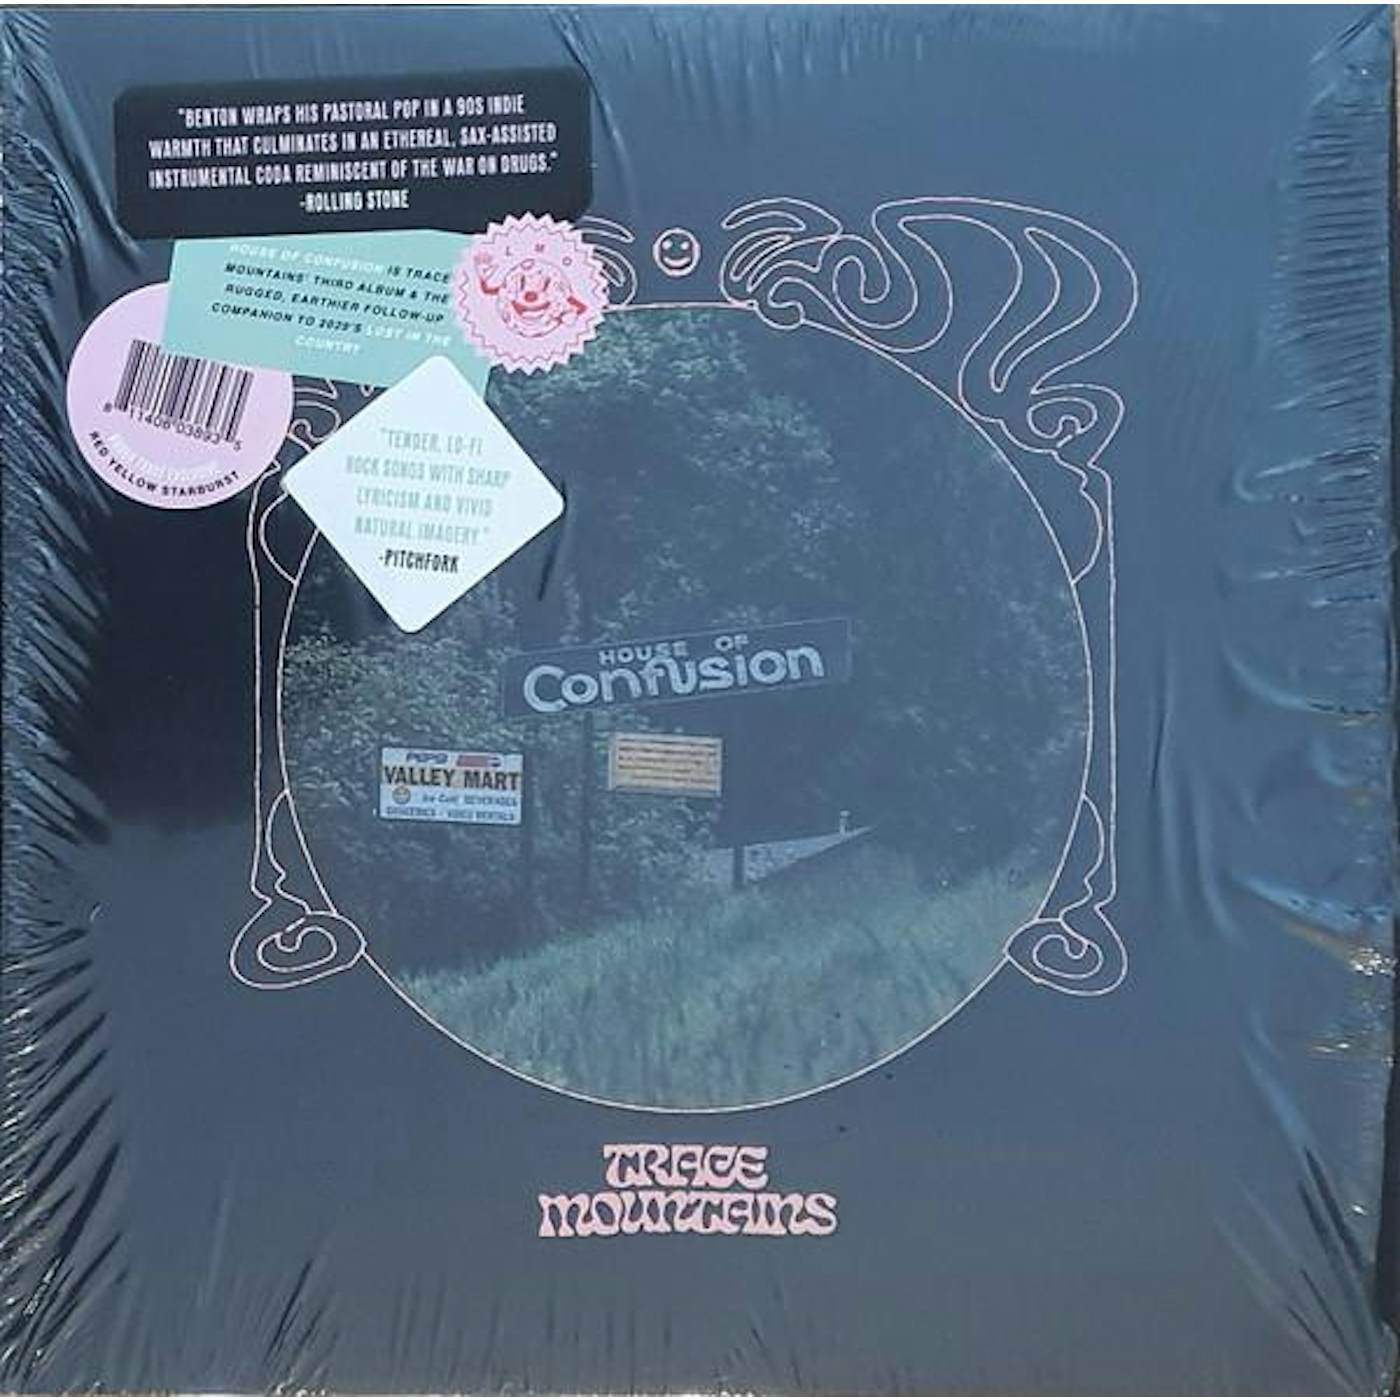 Trace Mountains HOUSE OF CONFUSION Vinyl Record